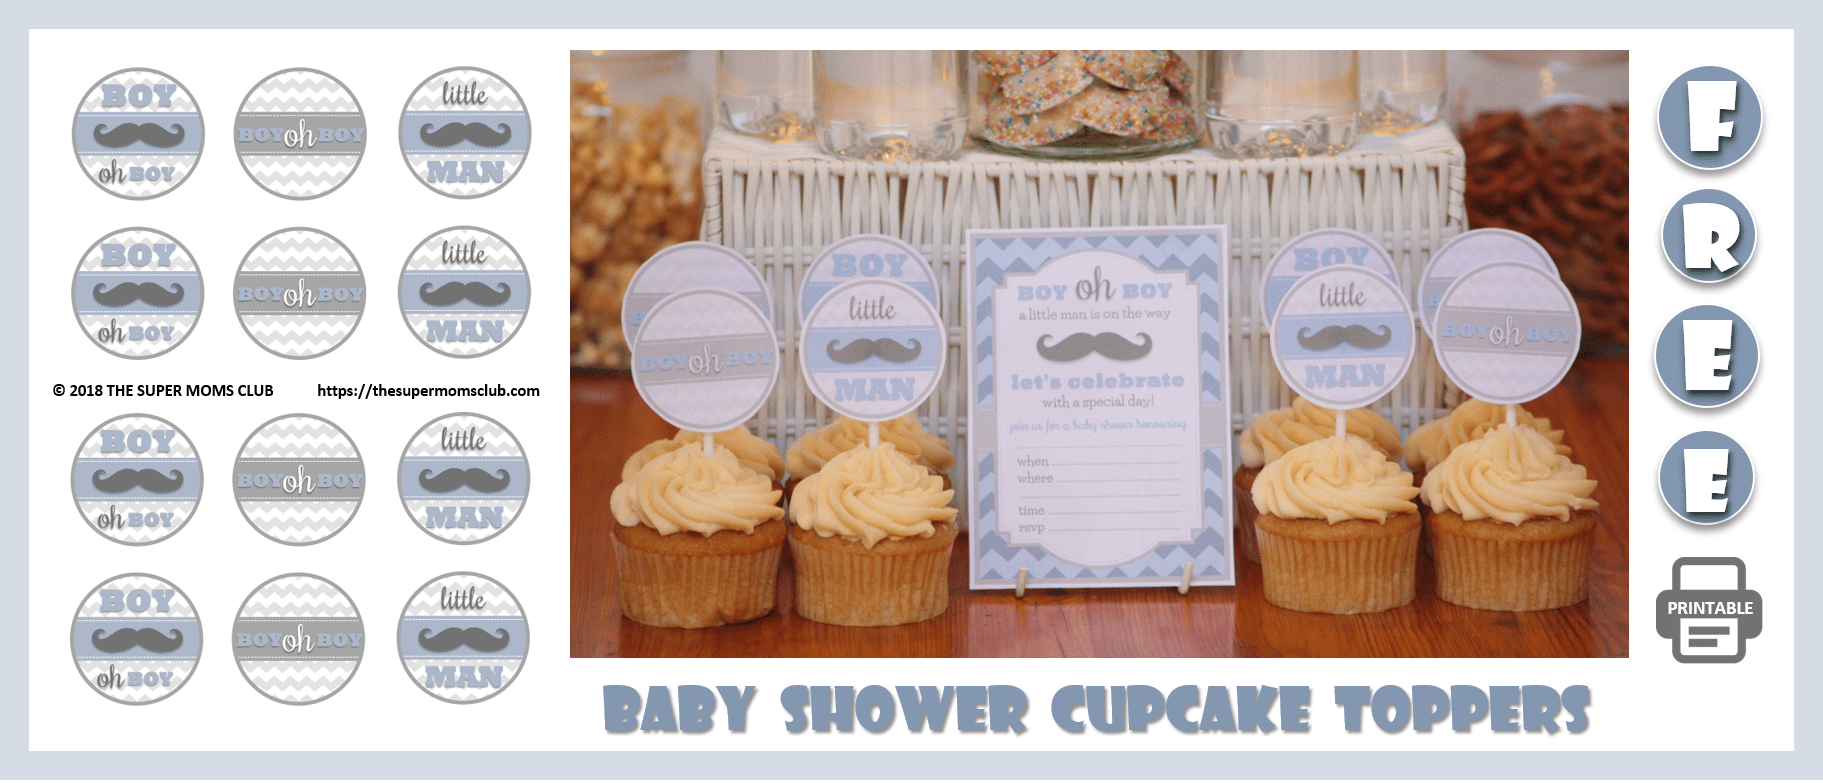 Little Man Themed Baby Shower FREE PRINTABLE Cupcake Toppers - The Super Moms Club